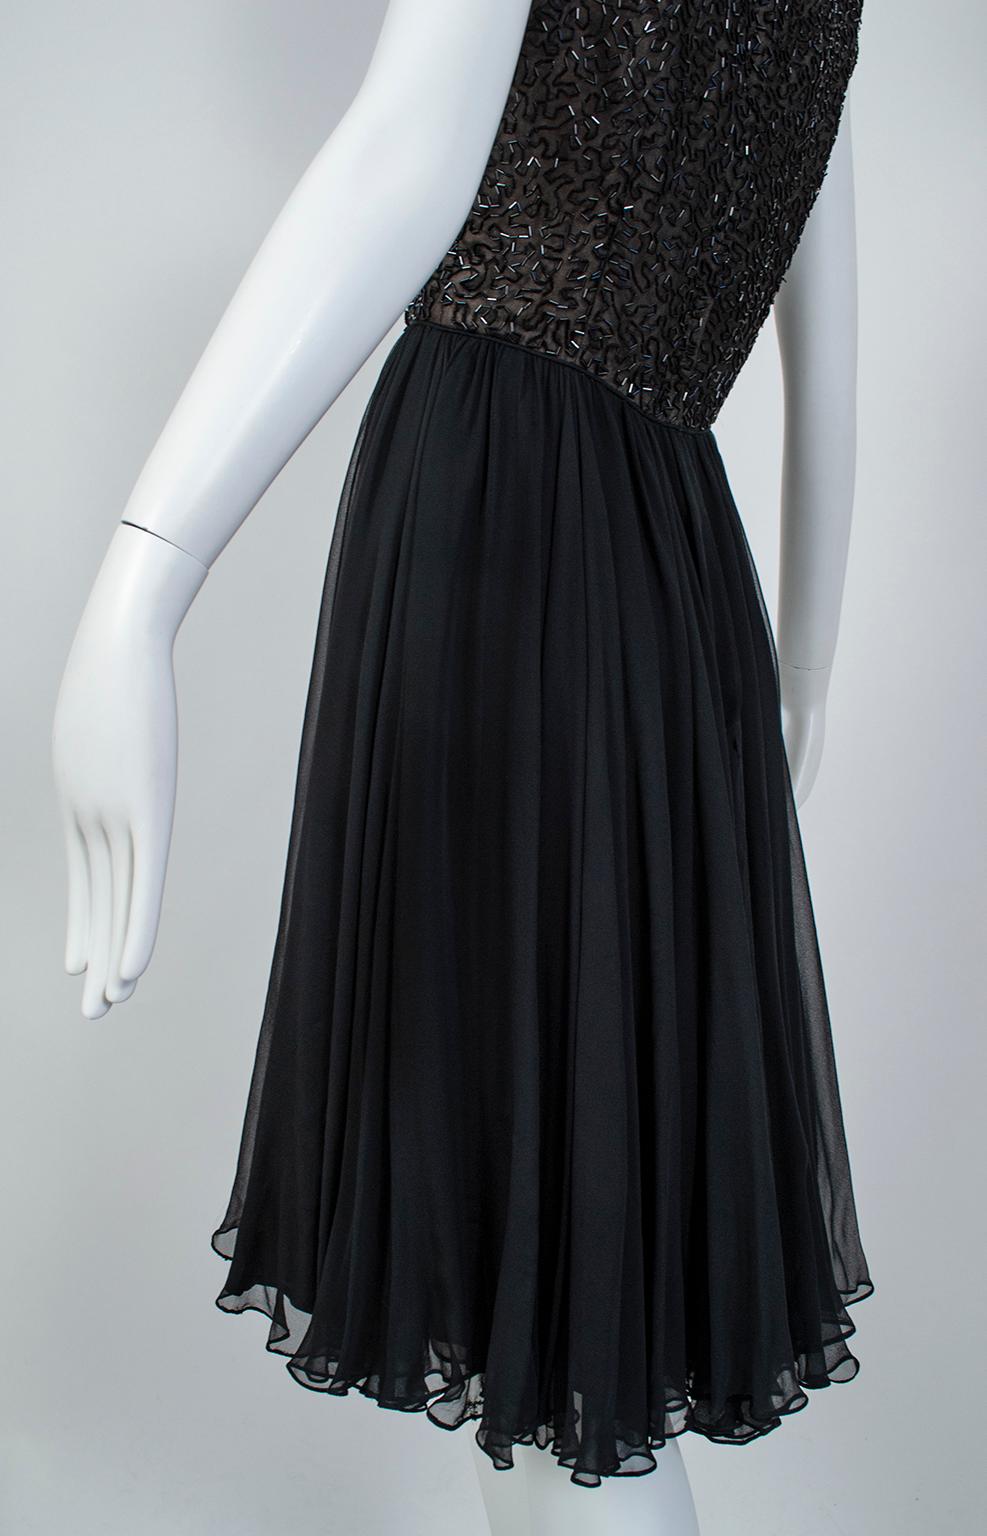 Black Chandelier Bead Illusion Party Dress with Swirling Trumpet Skirt– M, 1950s For Sale 6